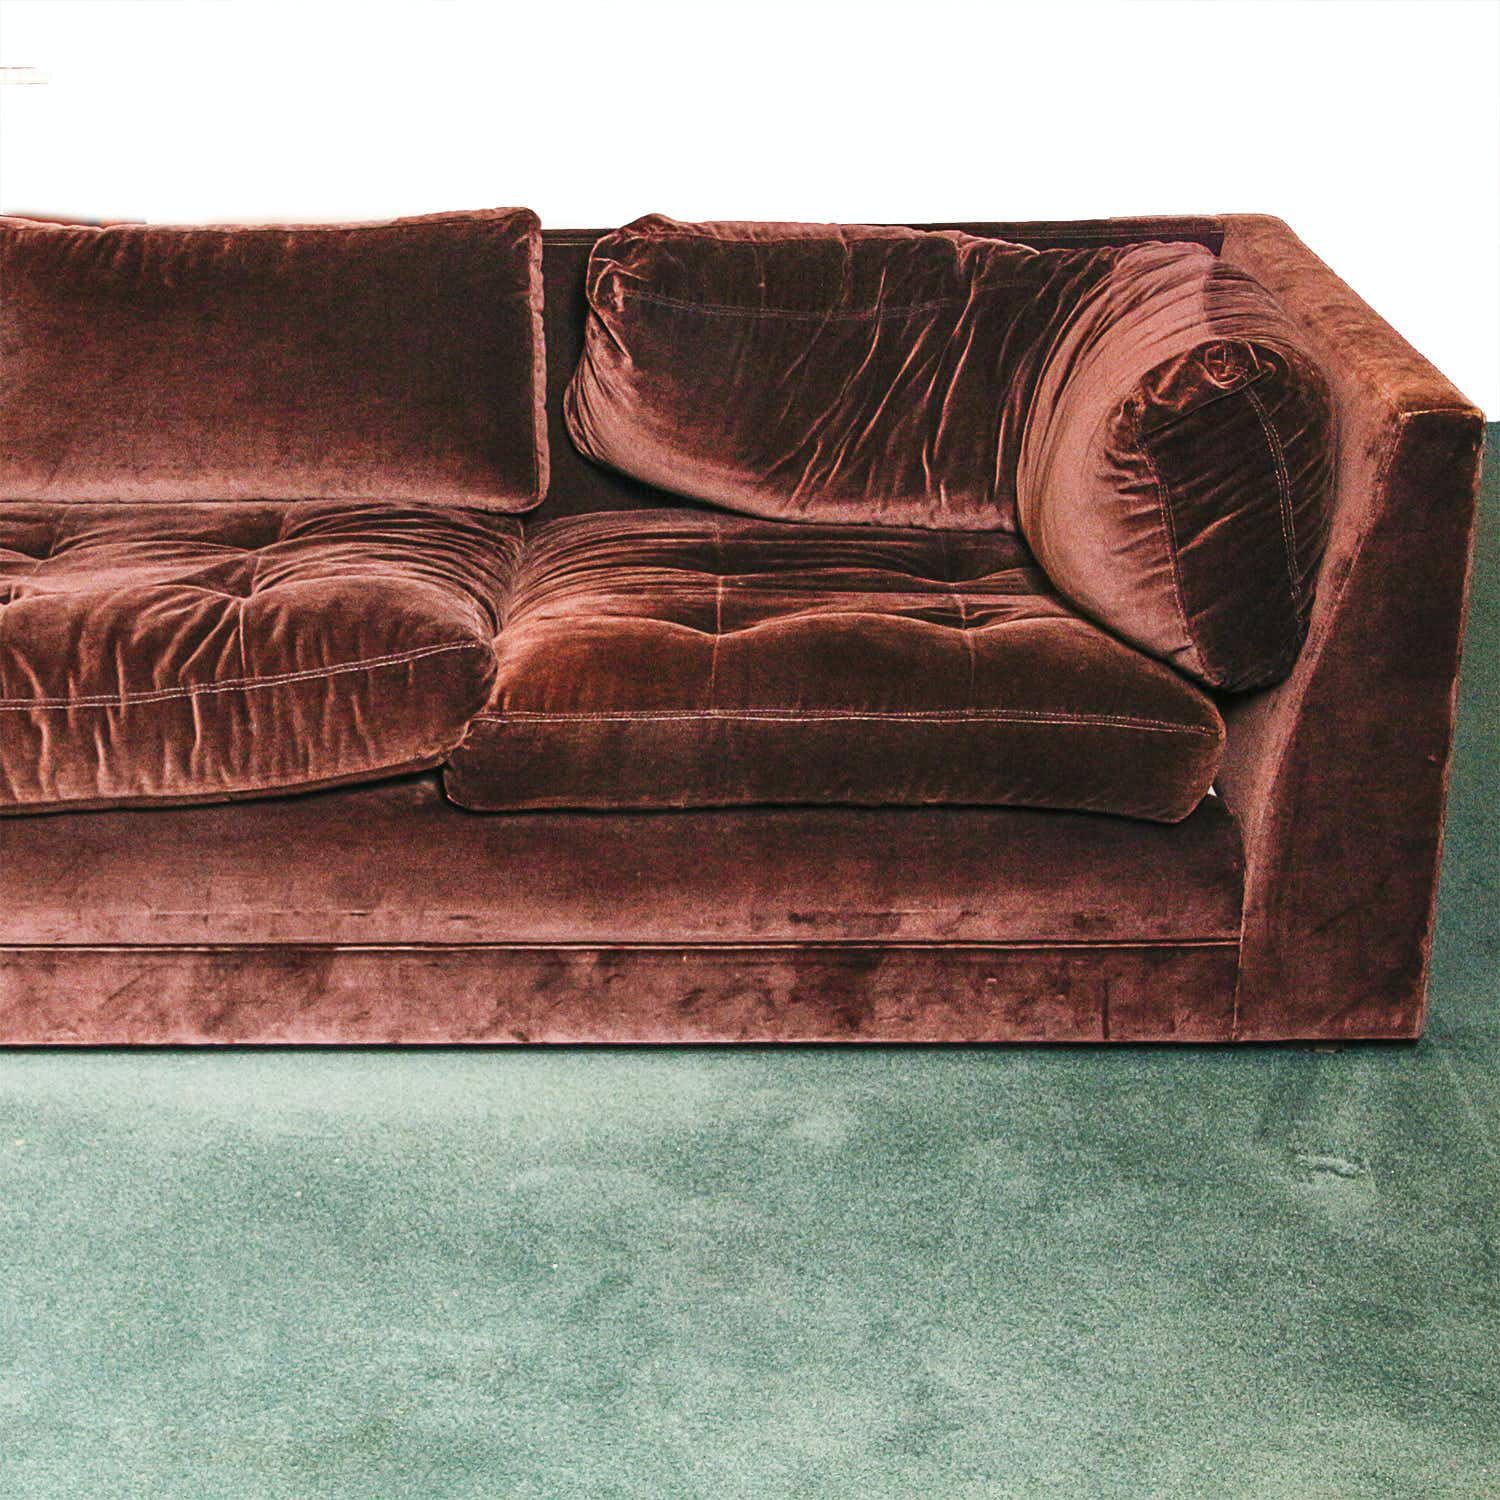 Chocolate Brown Velvet Upholstered Sectional Sofa : Ebth Pertaining To Sofas In Chocolate Brown (Gallery 10 of 20)